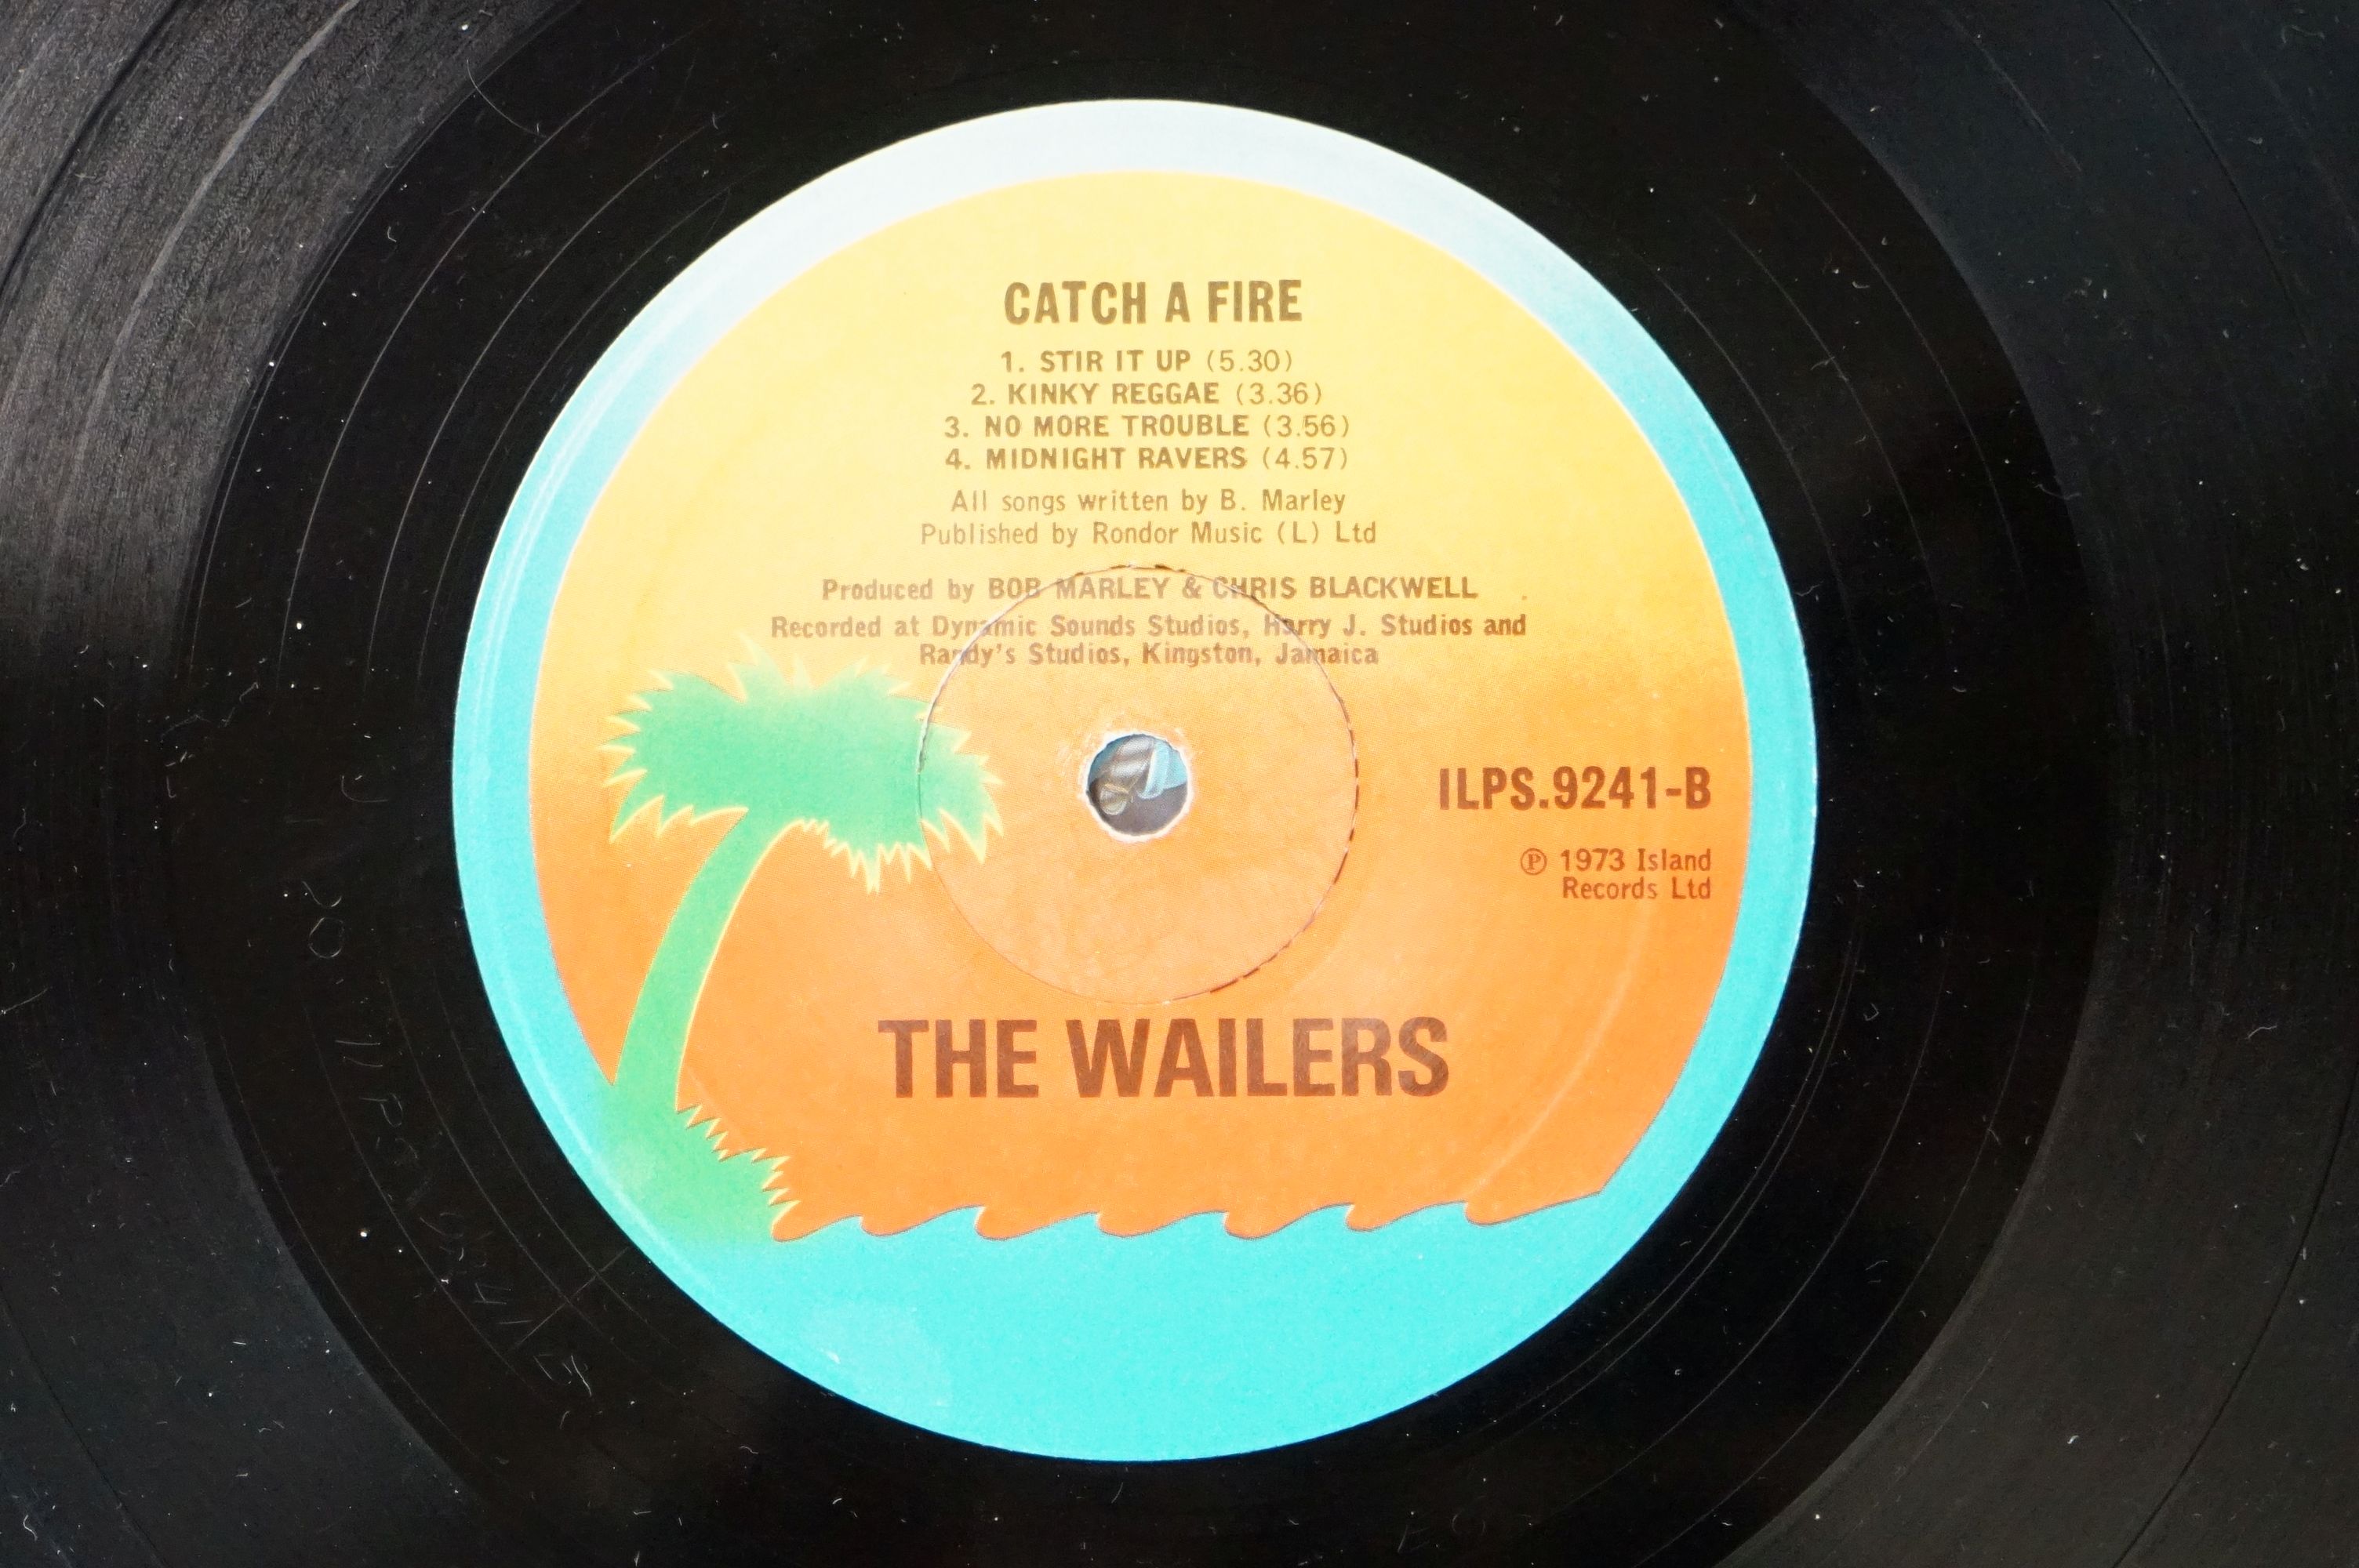 Vinyl - The Wailers / Bob Marley - Catch A Fire LP on Island Records ILPS 9241. UK 1975 pressing - Image 5 of 8